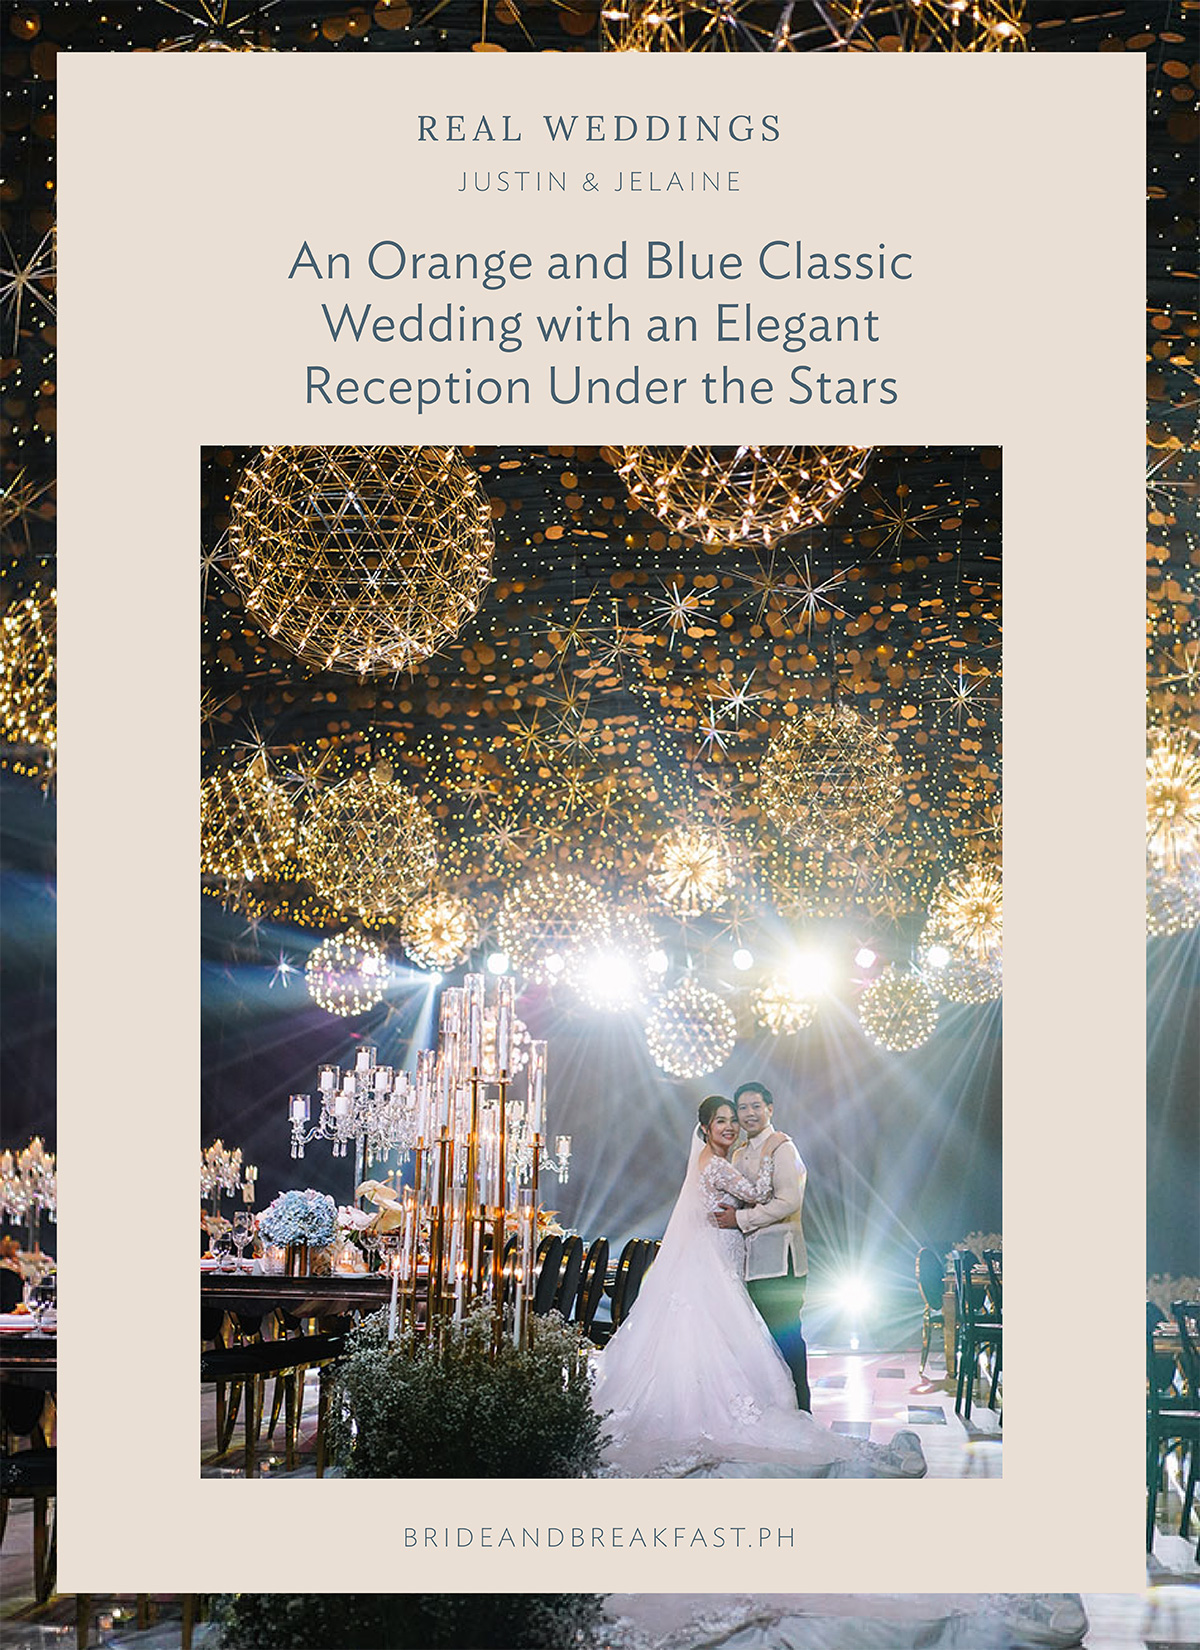 An Orange and Blue Classic Wedding with an Elegant Reception Under the Stars